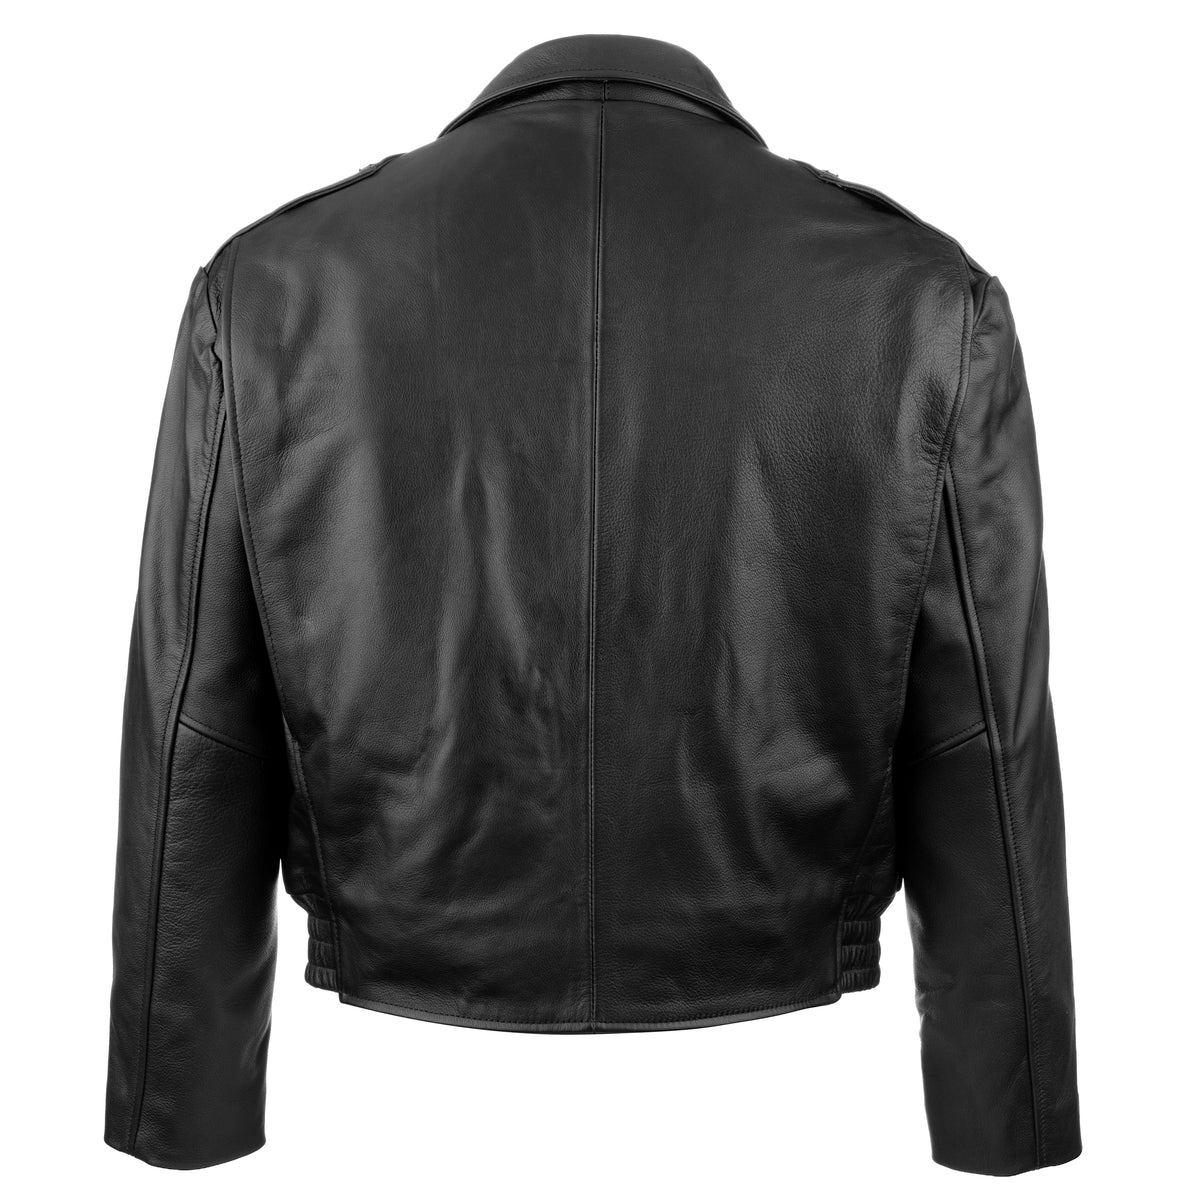 Chicago Cowhide Leather Police Jacket – Taylor's Leatherwear, Inc.